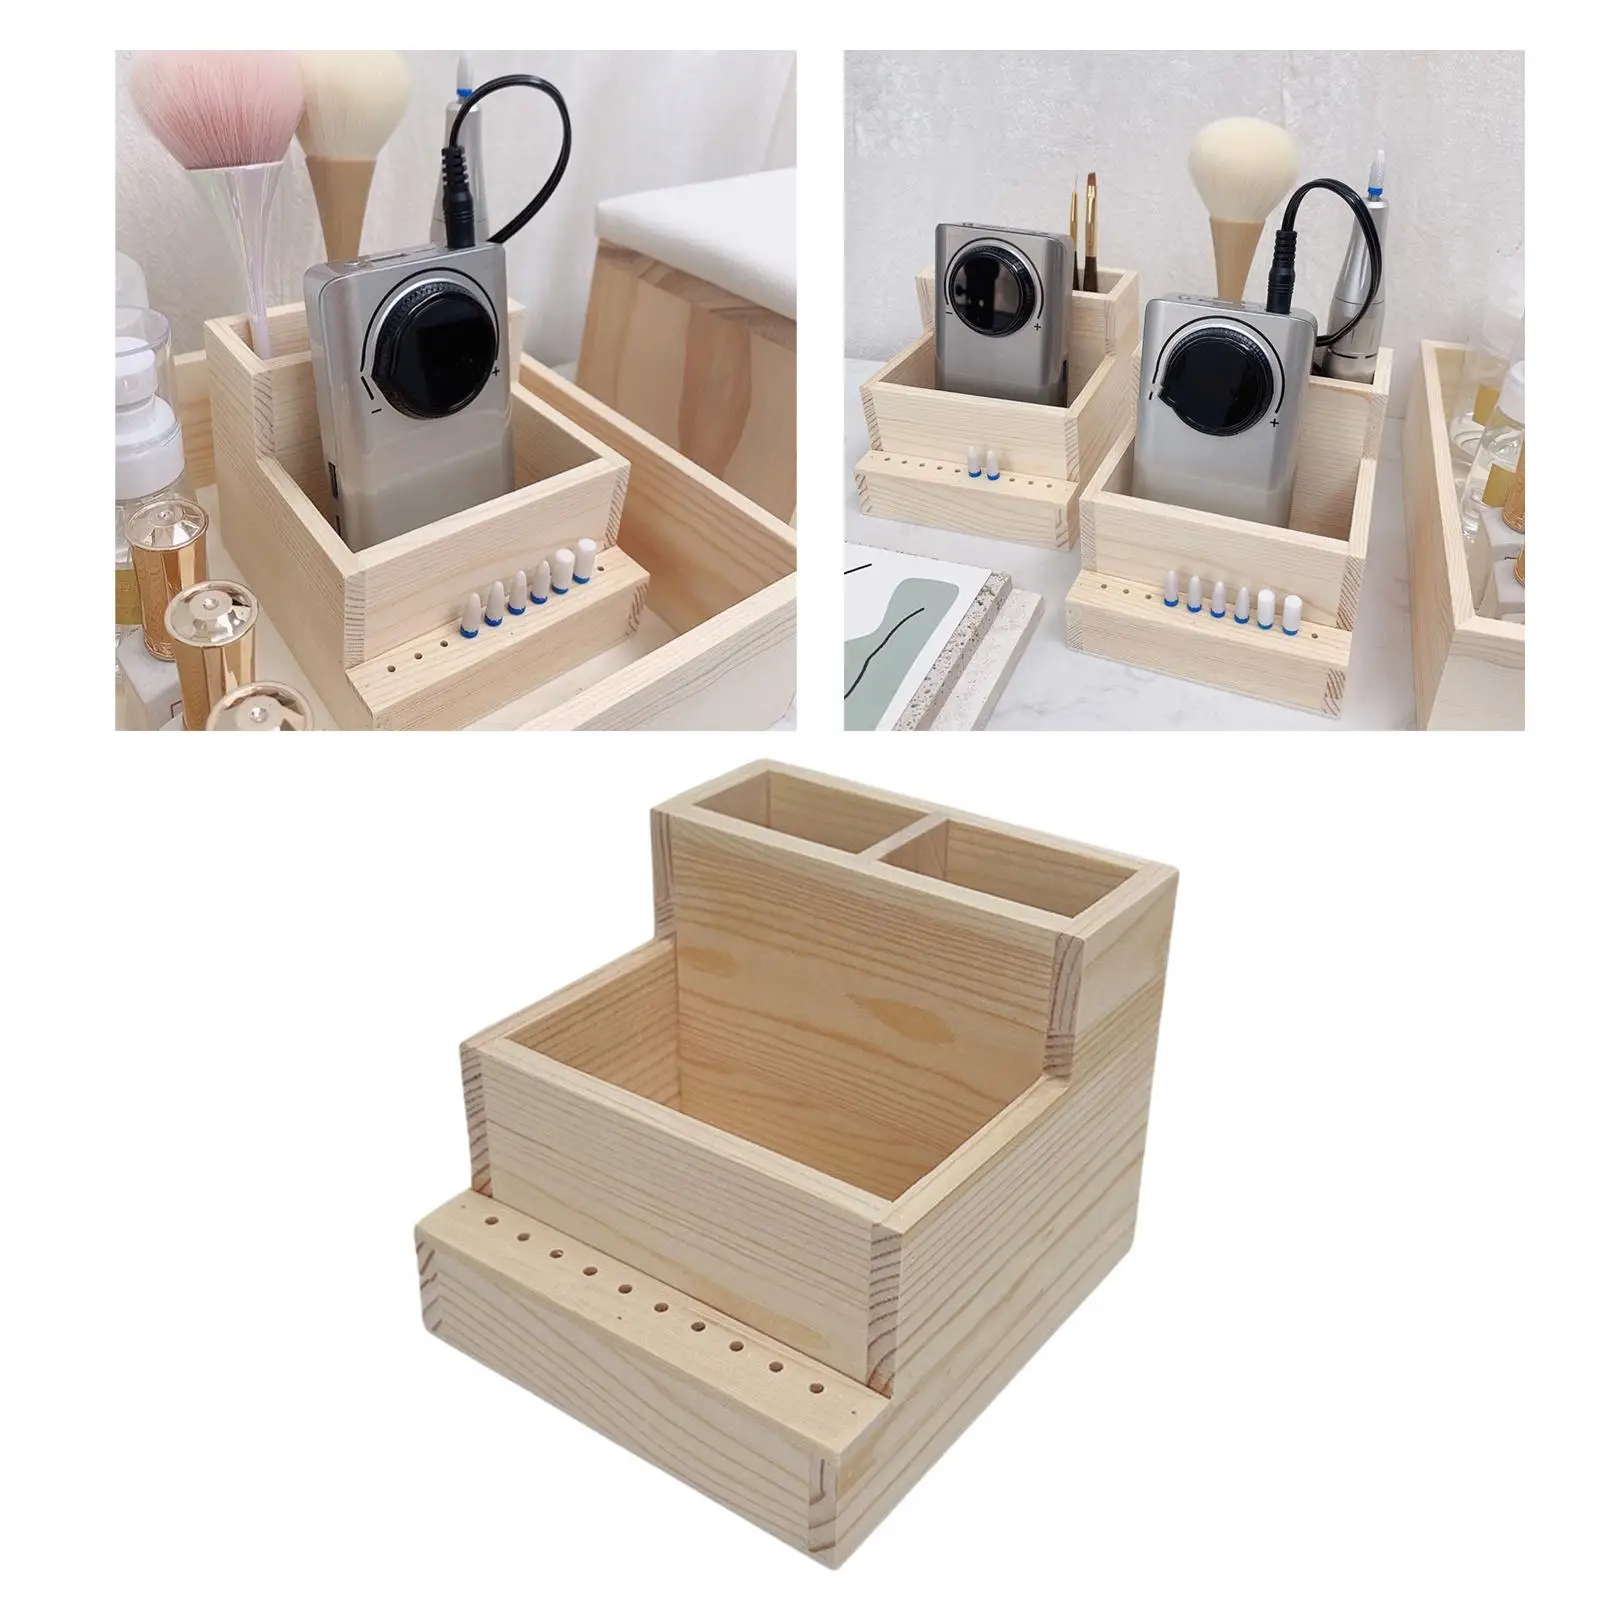 Nail Drill Bits Wood Stand Organizer, Middle Row for Nail Drill Machine 11.5x11x10cm